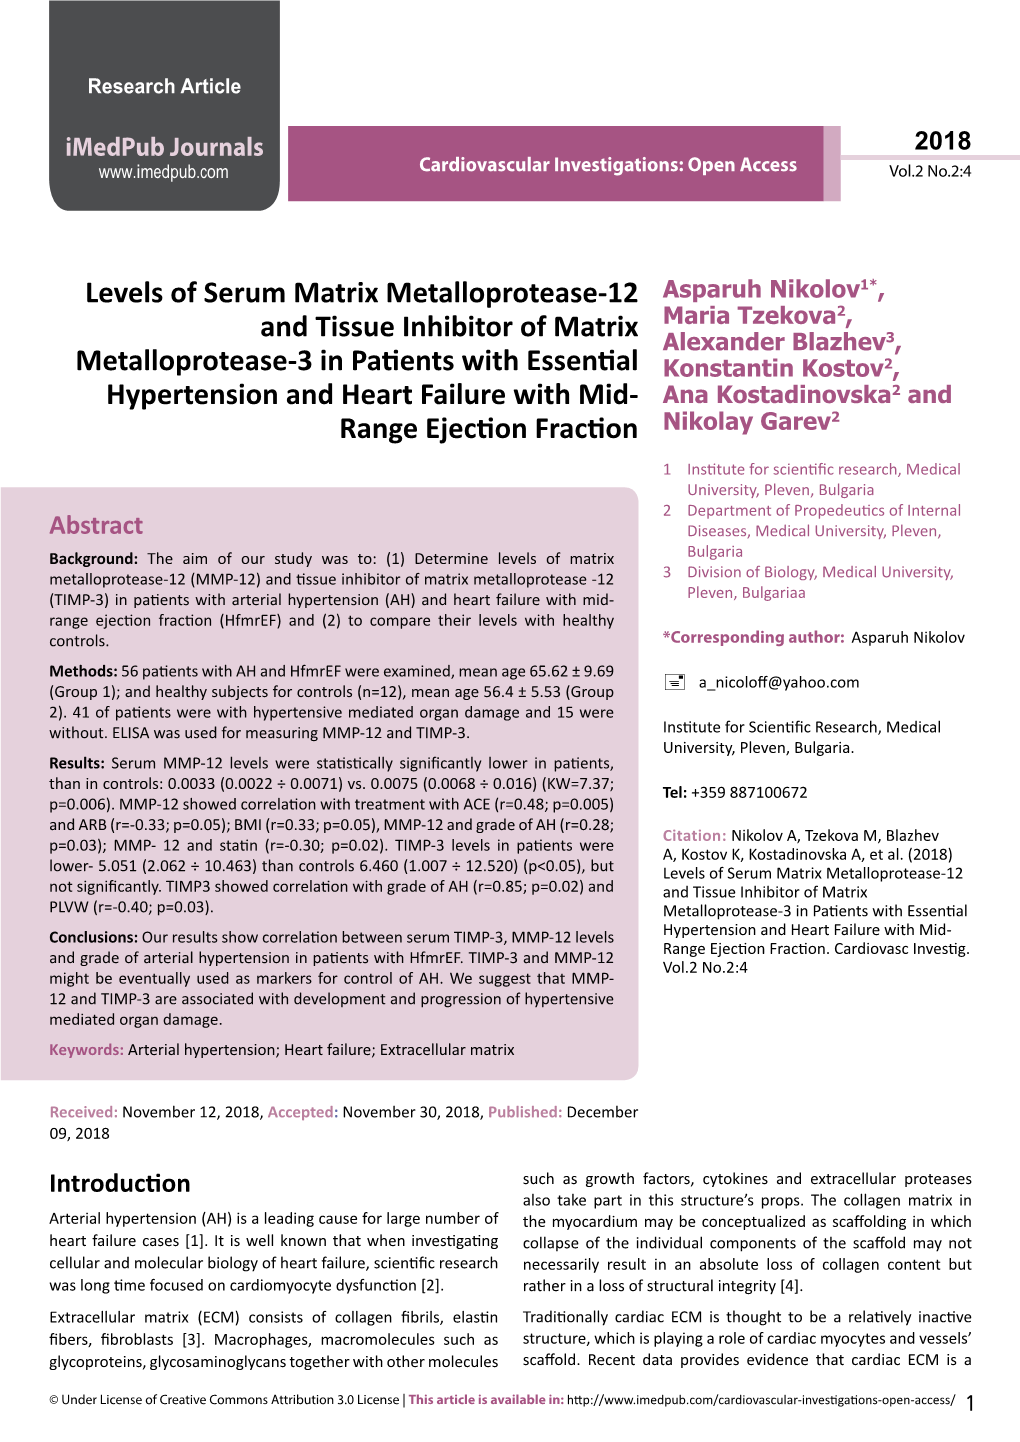 Levels of Serum Matrix Metalloprotease-12 and Tissue